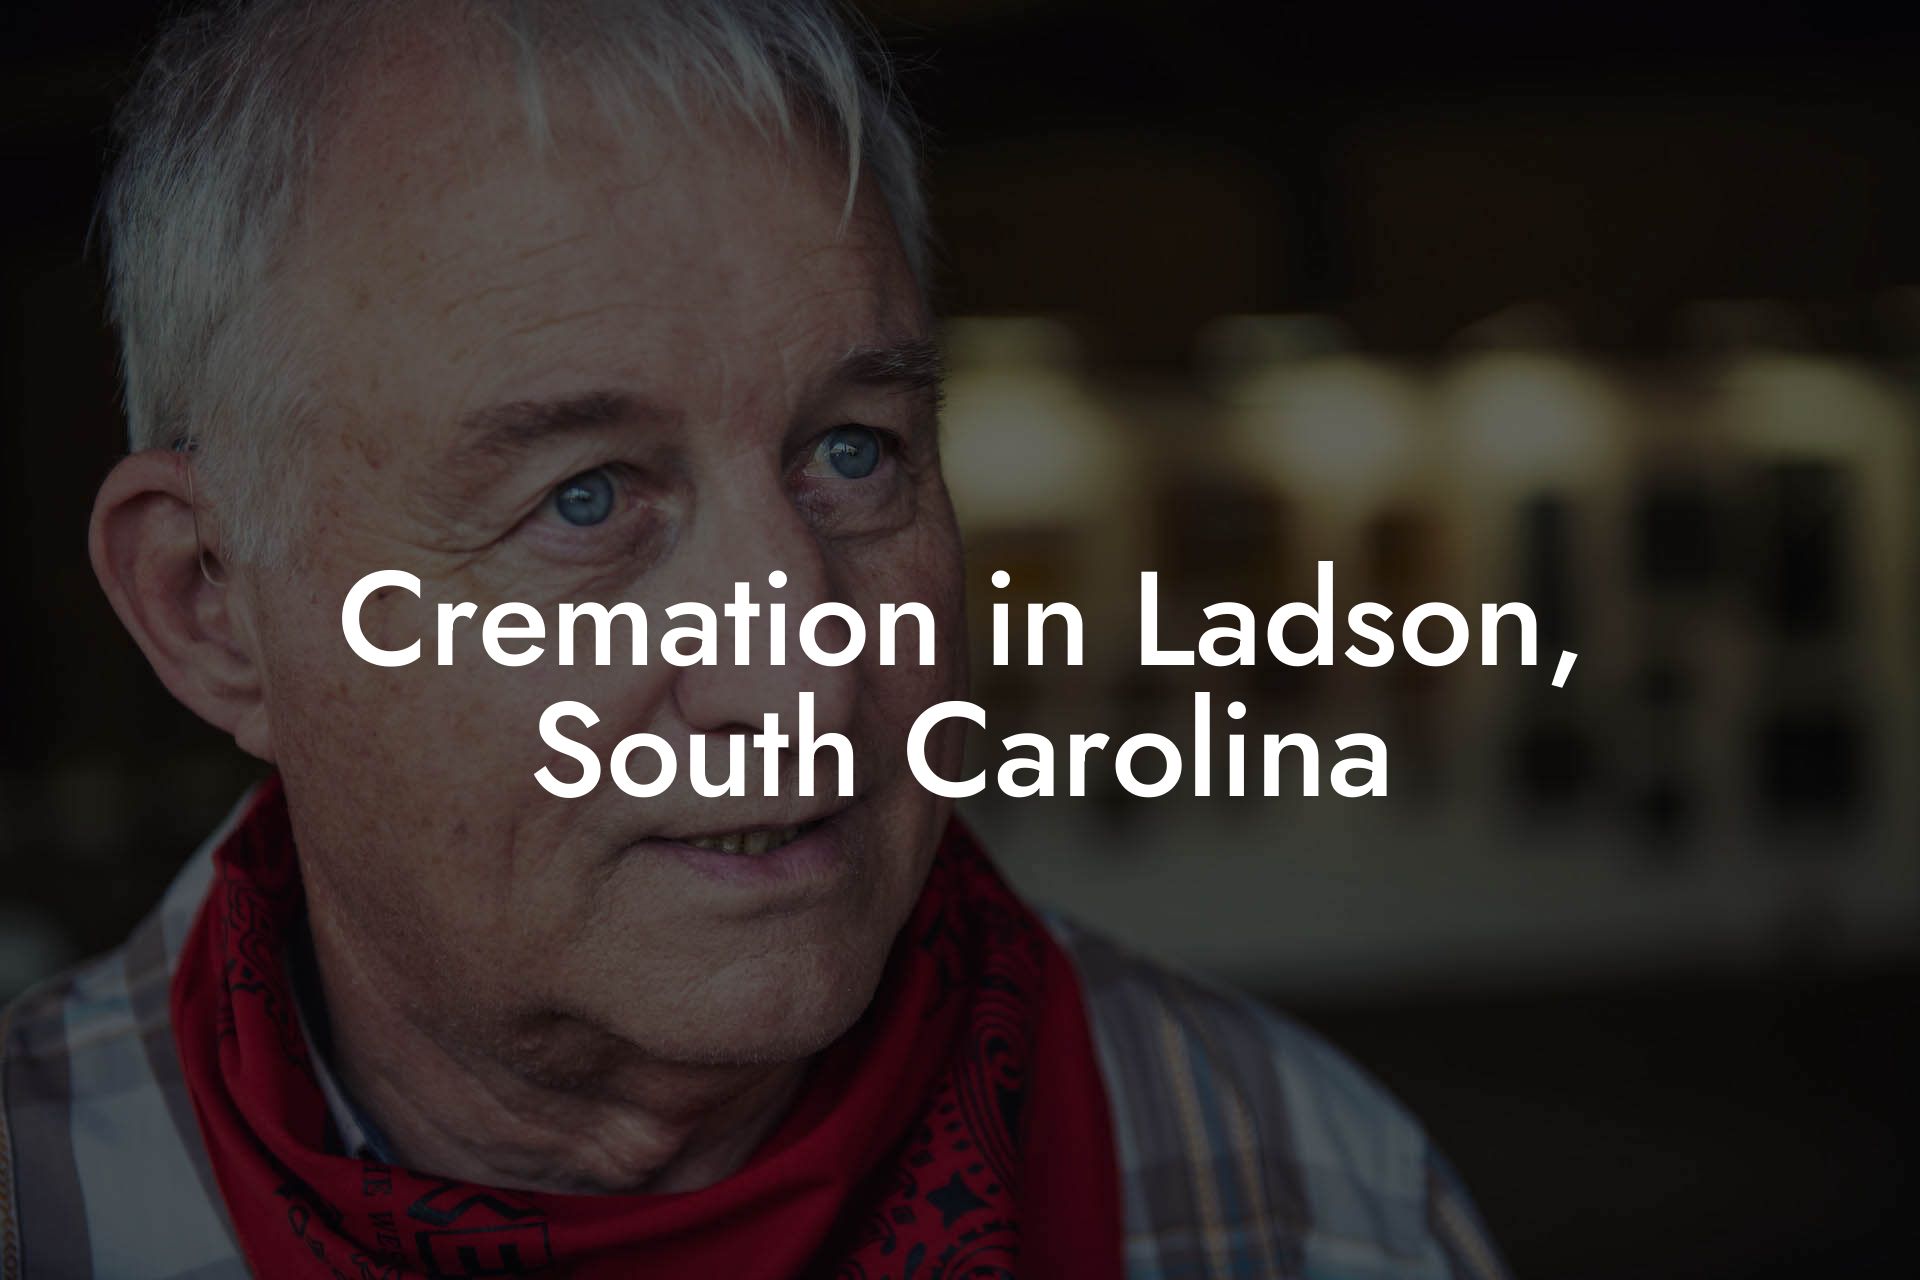 Cremation in Ladson, South Carolina